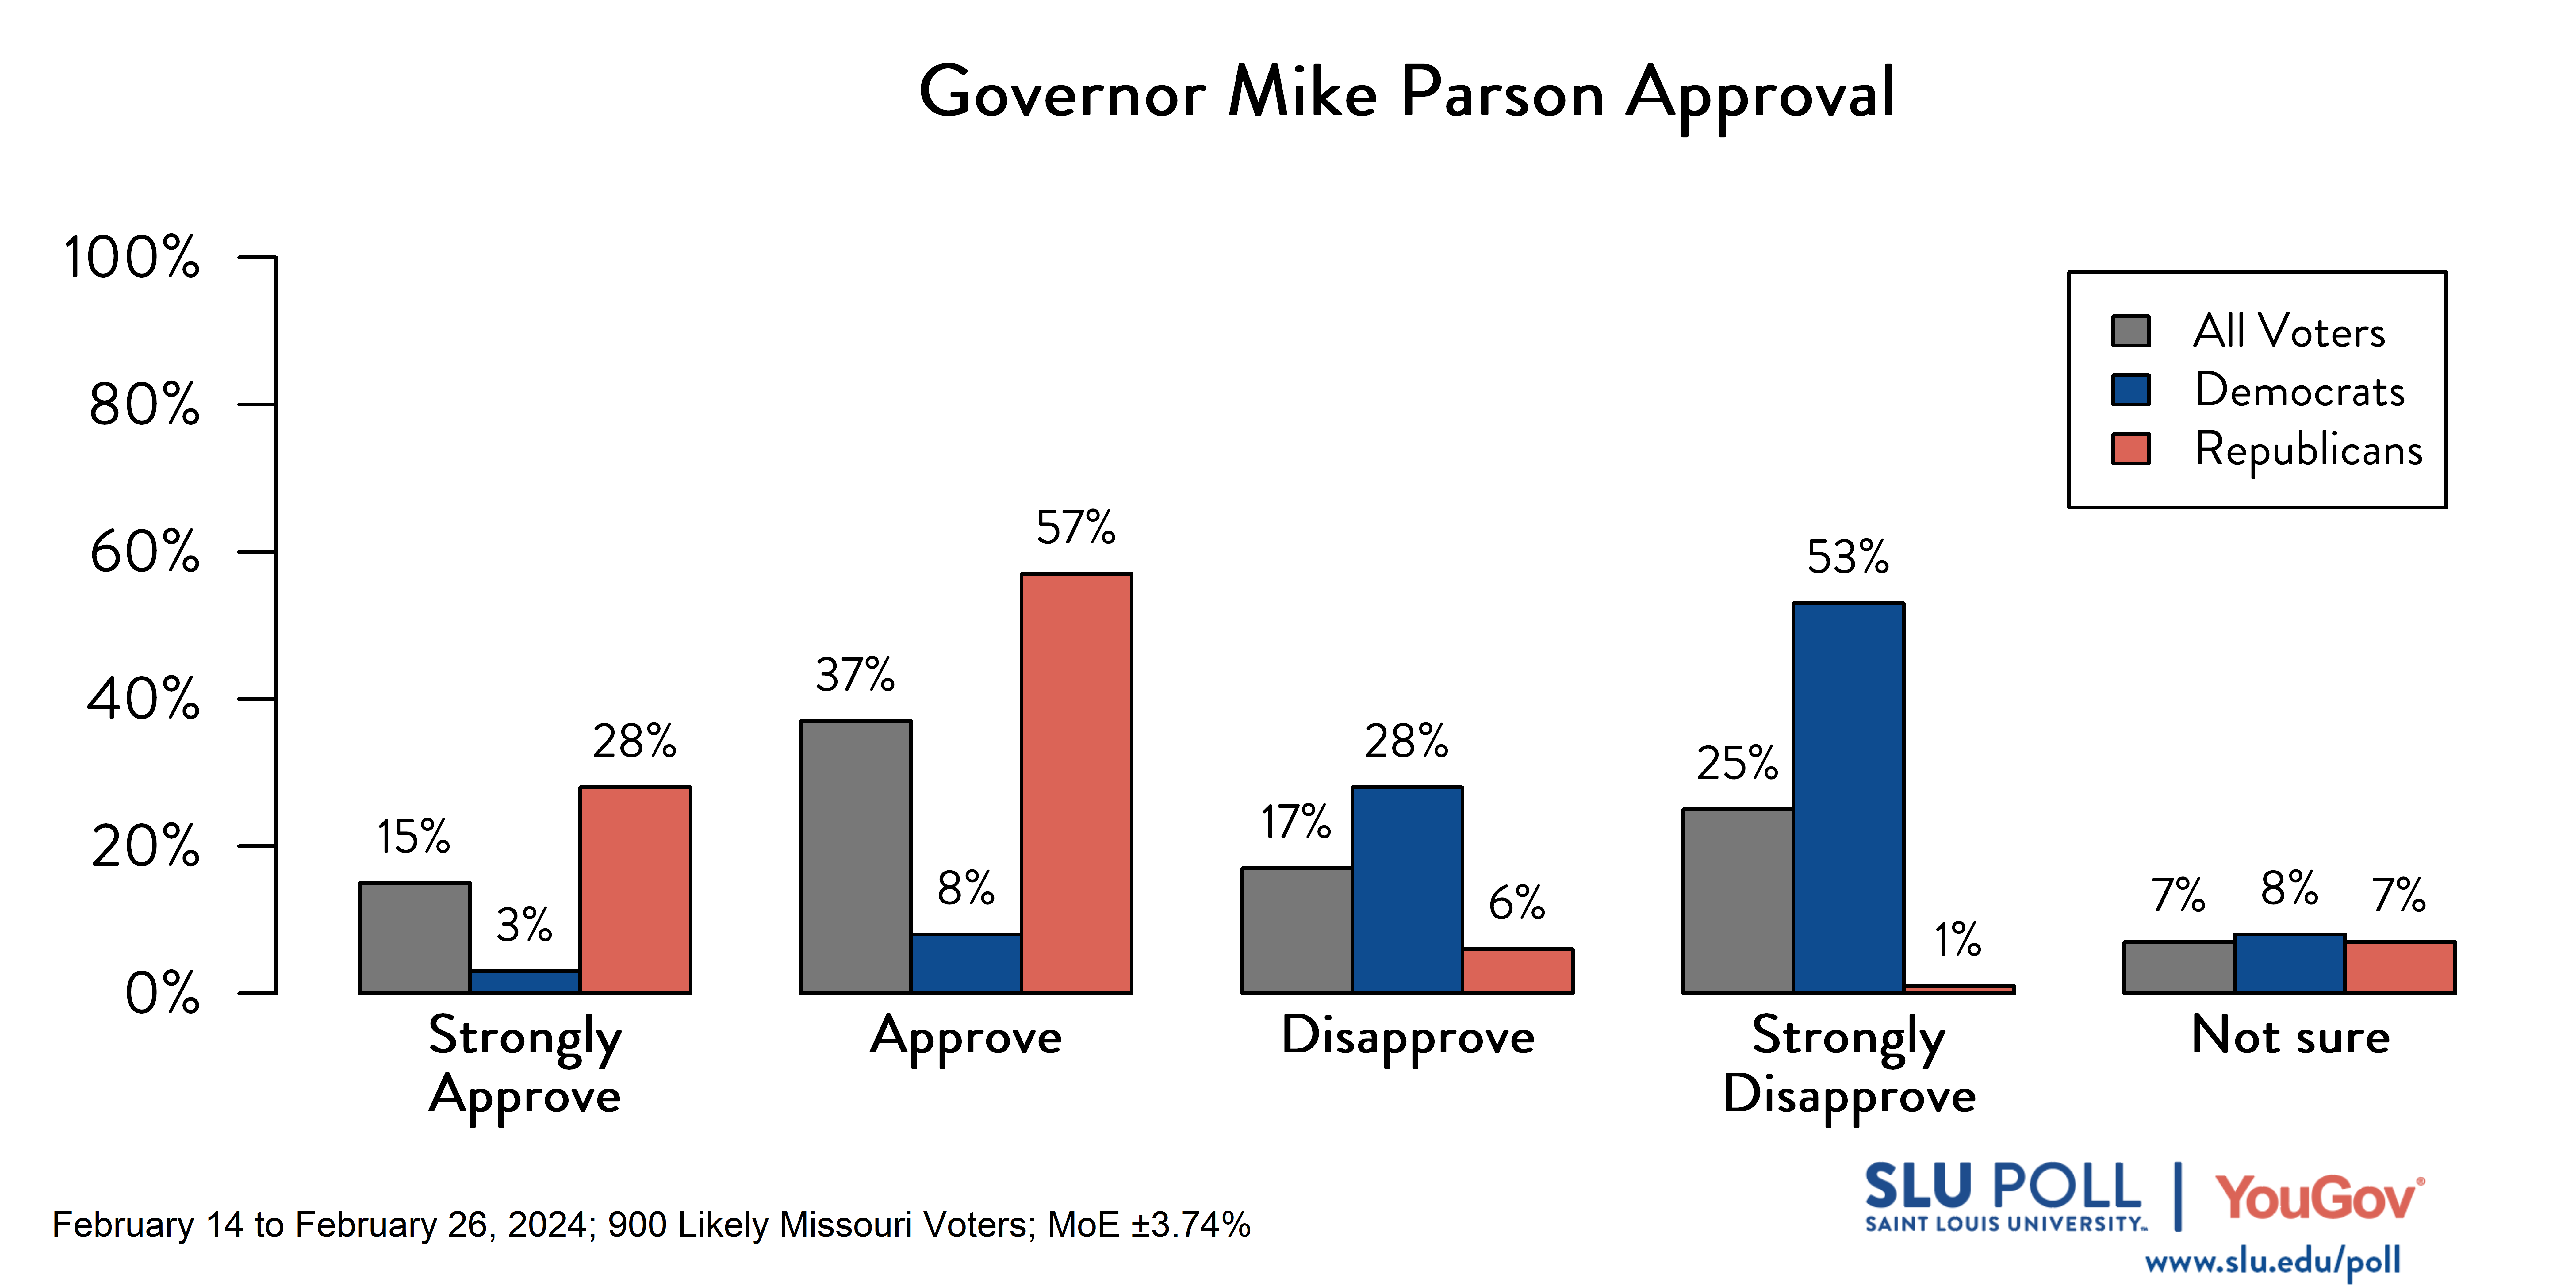 Likely voters' responses to 'Do you approve or disapprove of the way each is doing their job…Governor Mike Parson?': 15% Strongly approve, 37% Approve, 17% Disapprove, 25% Strongly disapprove, and 7% Not sure. Democratic voters' responses: ' 3% Strongly approve, 8% Approve, 28% Disapprove, 53% Strongly disapprove, and 8% Not sure. Republican voters' responses:  28% Strongly approve, 57% Approve, 6% Disapprove, 1% Strongly disapprove, and 7% Not sure.